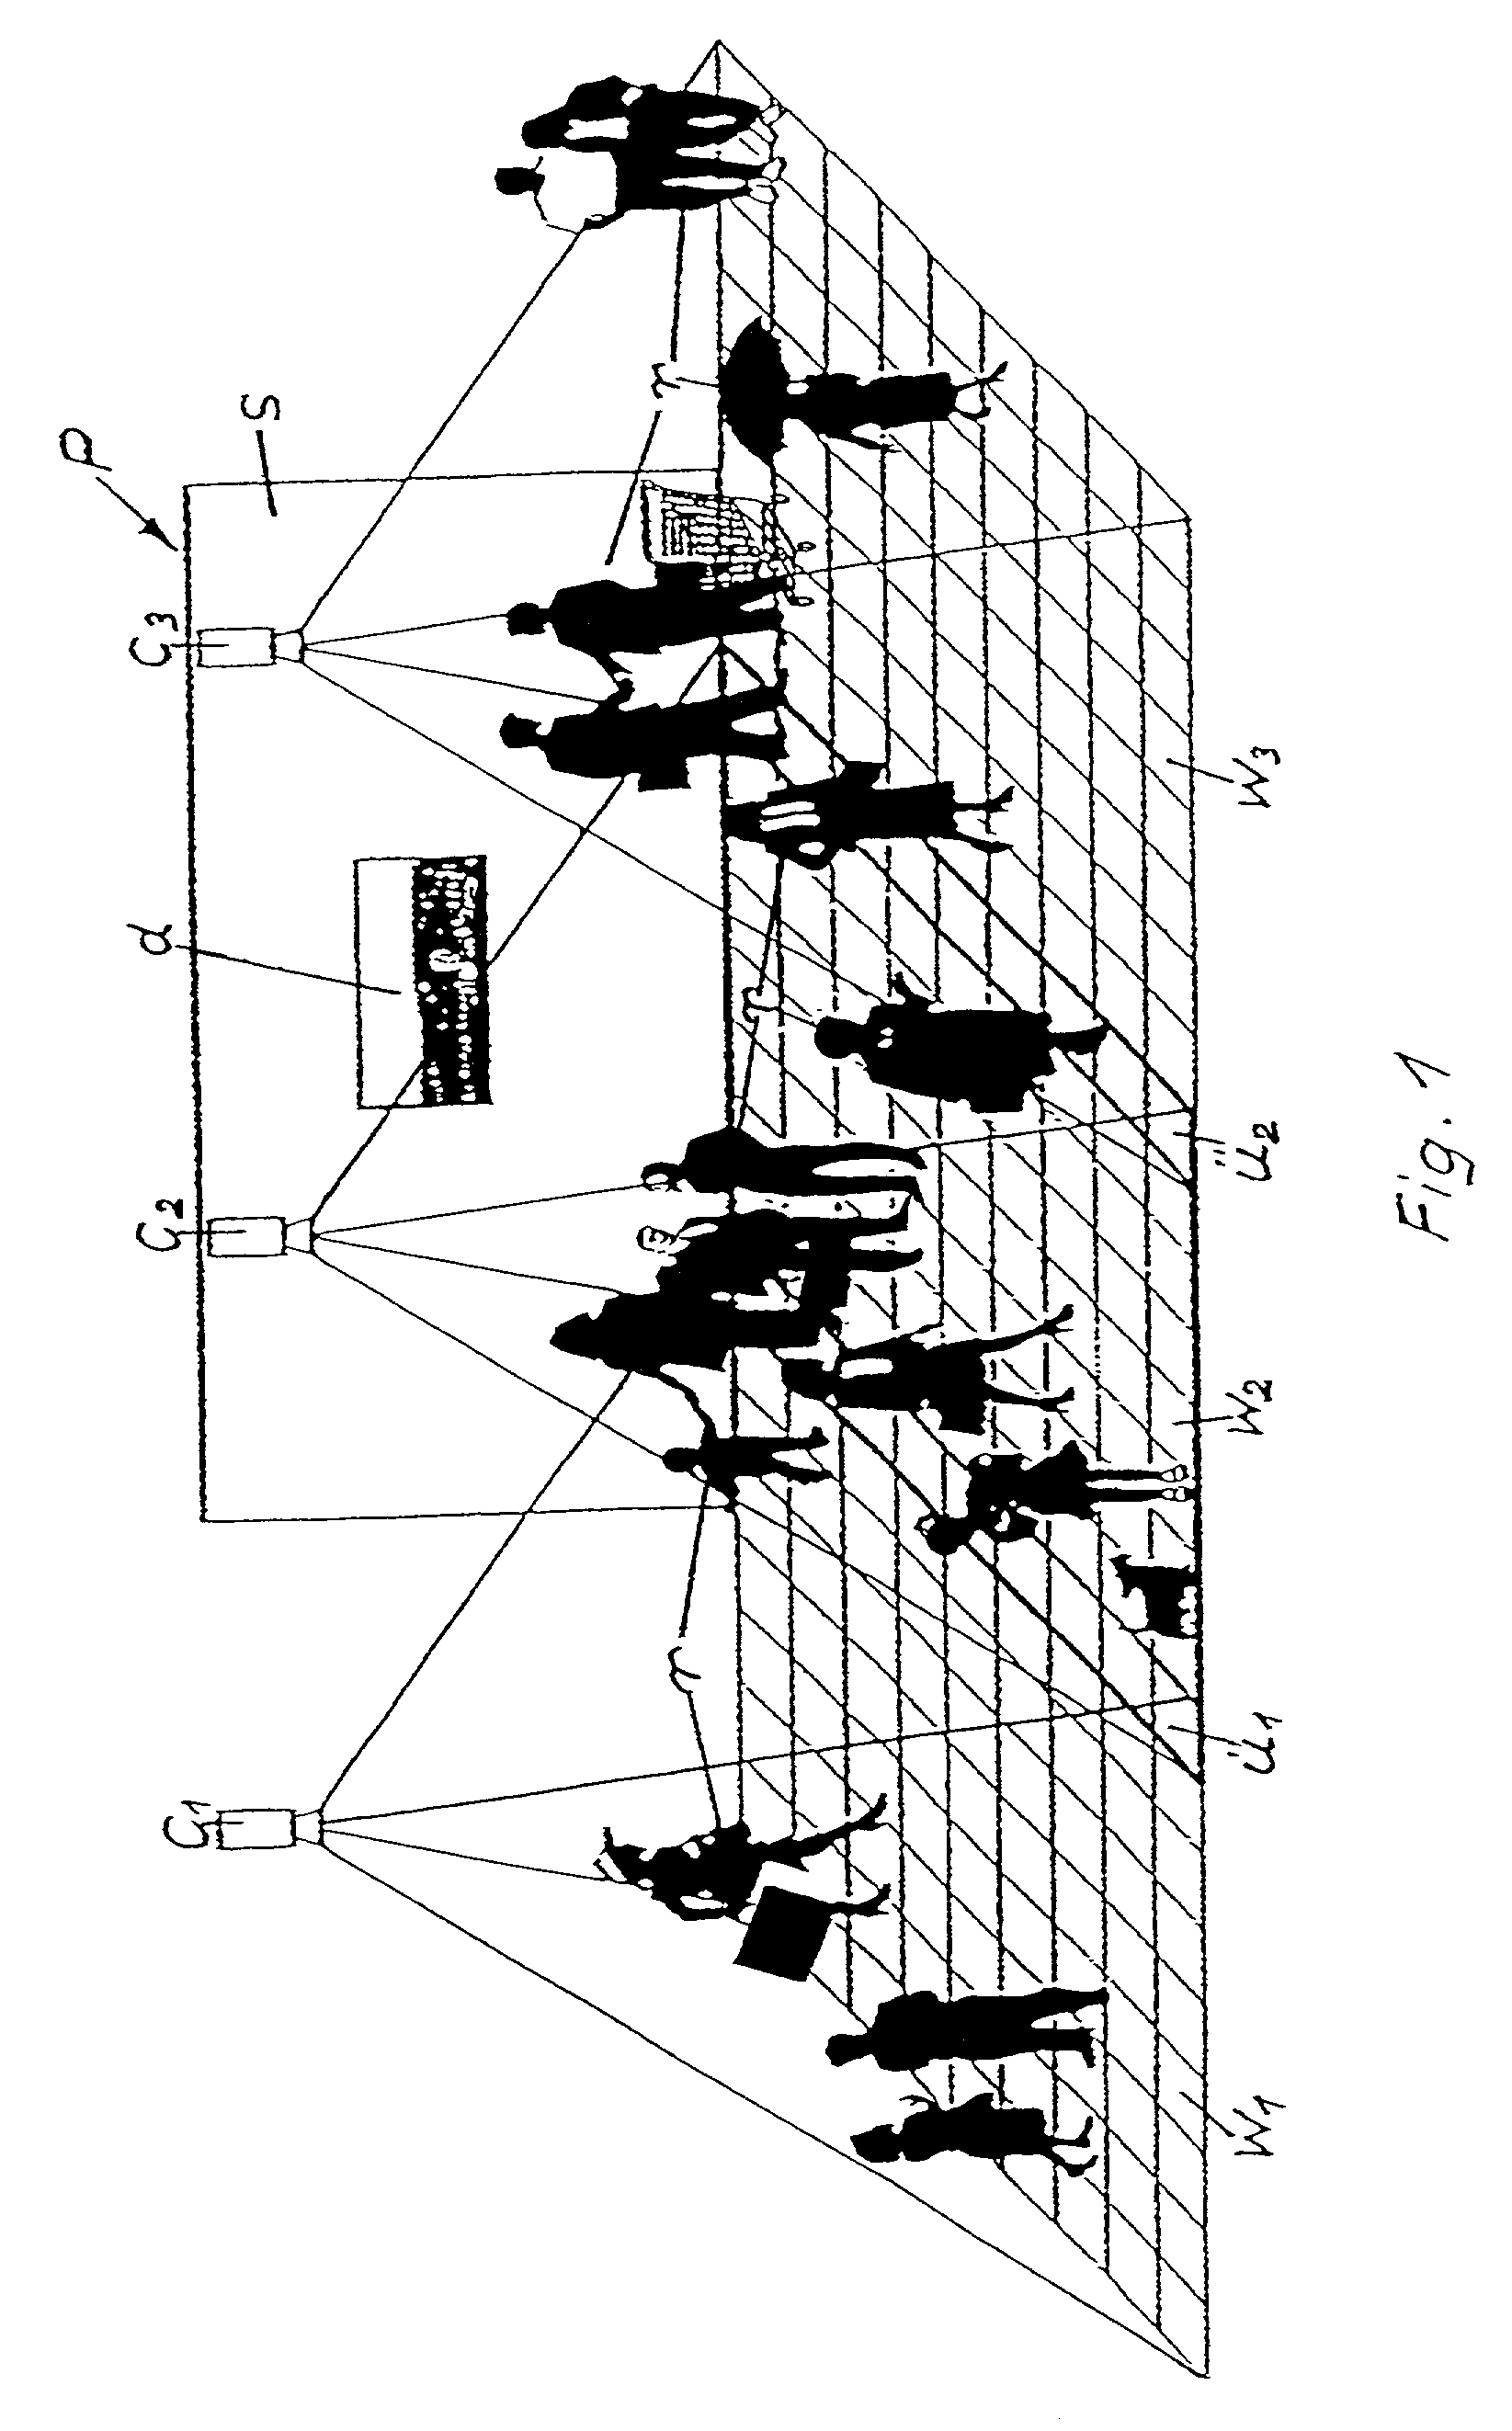 Method and device for detecting and analyzing the reception behavior of people